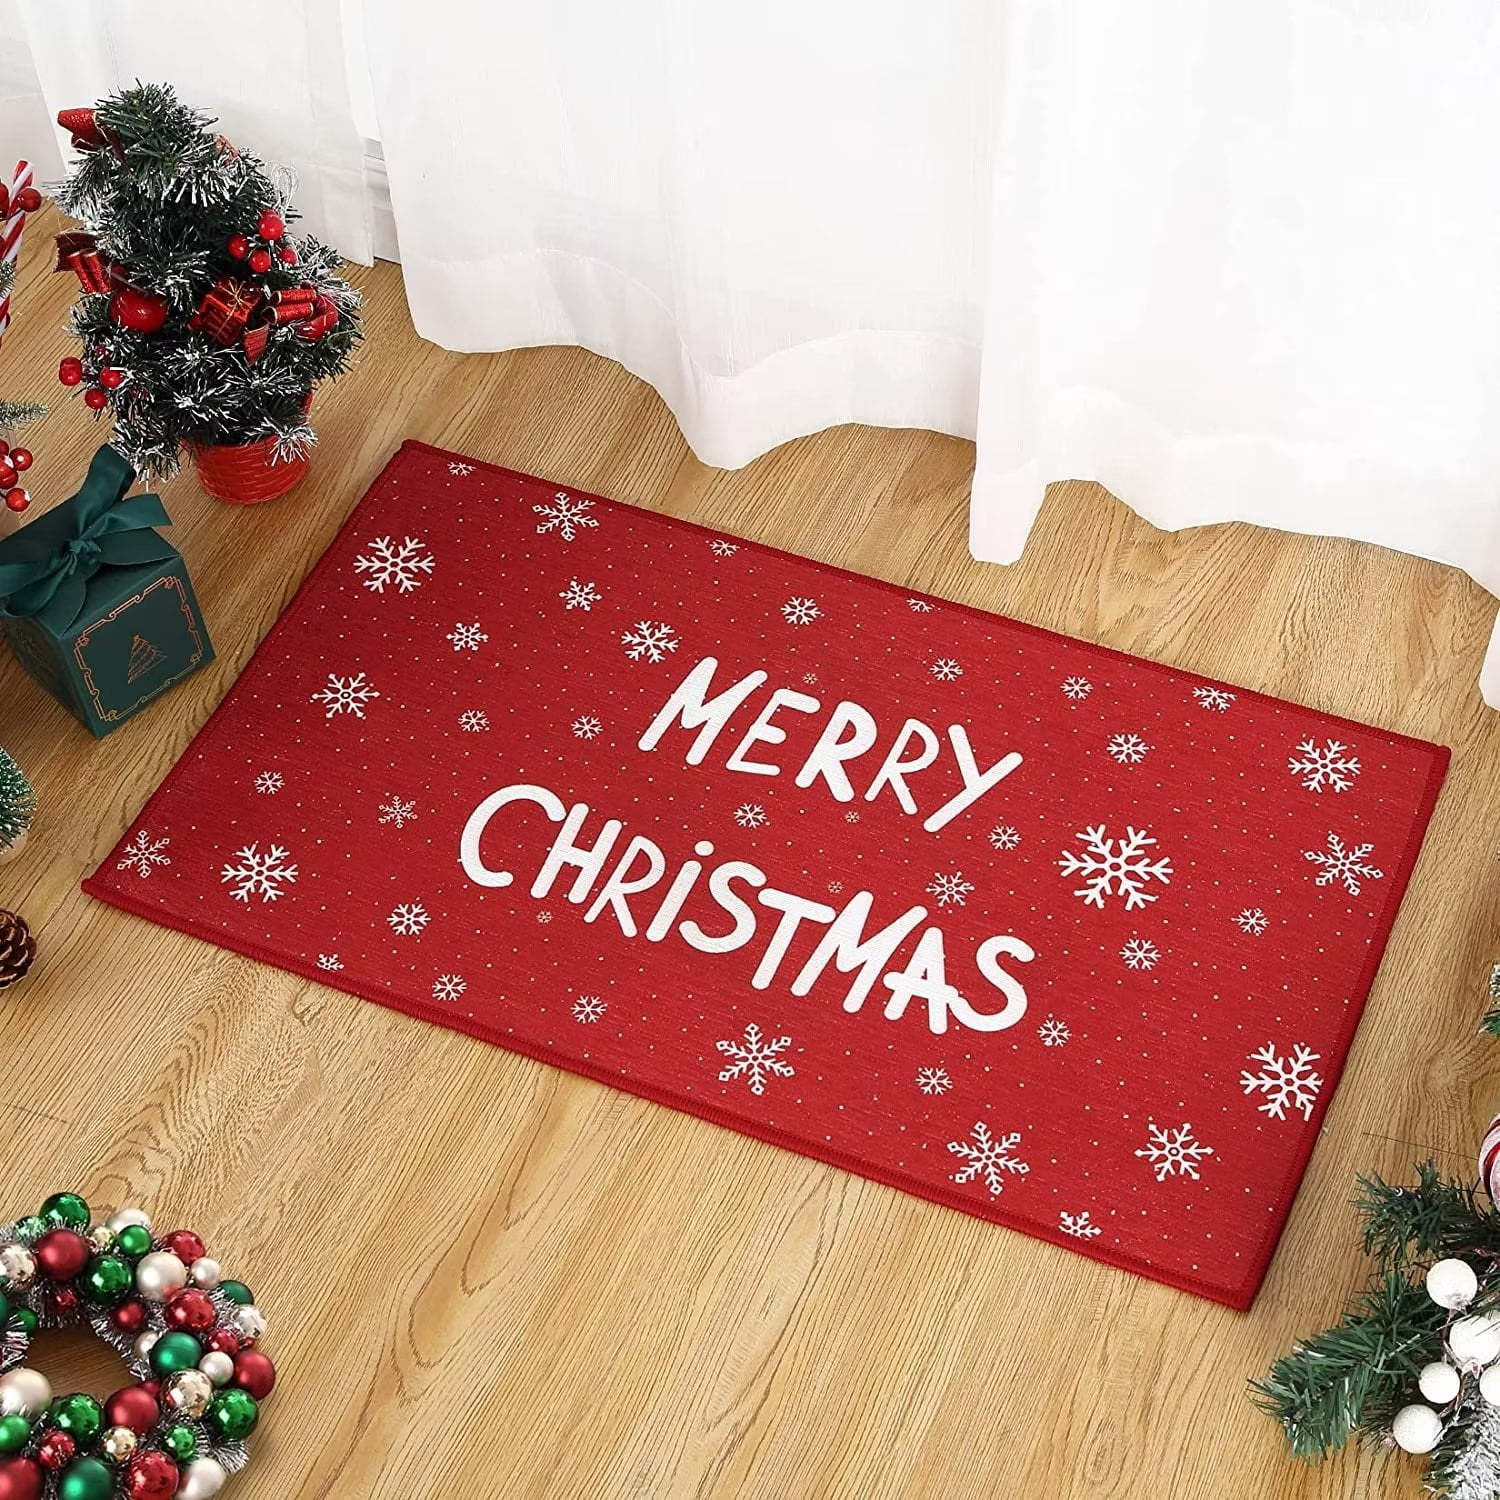 1pc Red & Black Plaid Christmas Themed Door Mat, Odorless Floor Mat, Santa  Claus, Christmas Tree, Deer, Merry Christmas Letter Design Small Carpet,  Welcome Mat For Indoor Entrance, Water Absorbent & Non-slip